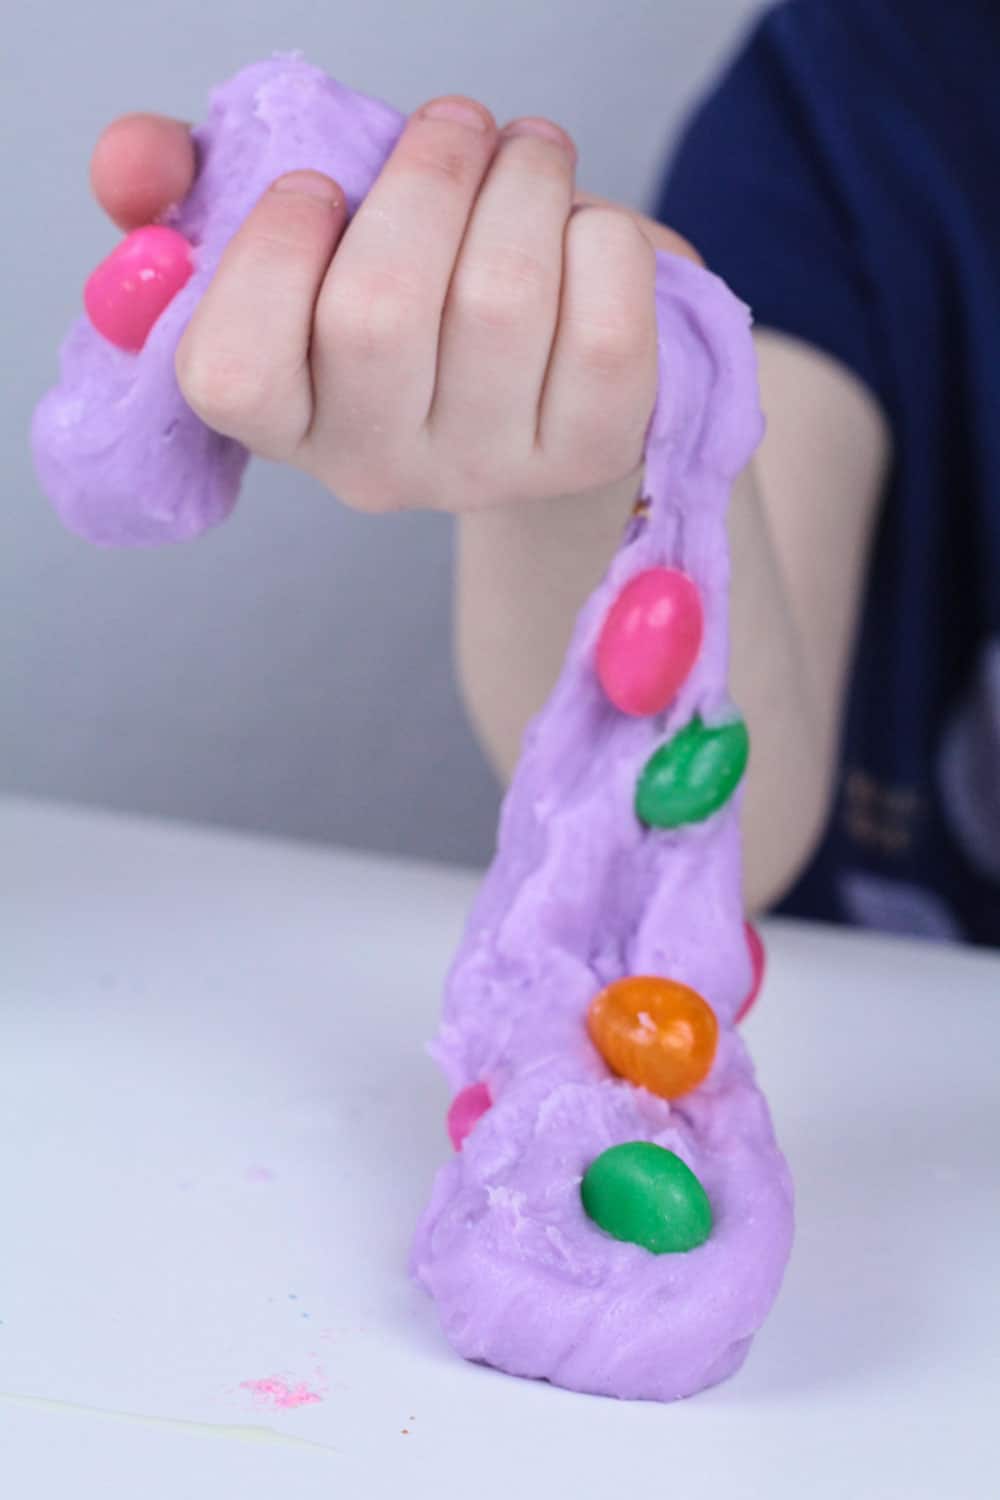 Learn how to make DIY lotion slime with these step-by-step instructions. Get perfectly soft and stretchy slime in five minutes!